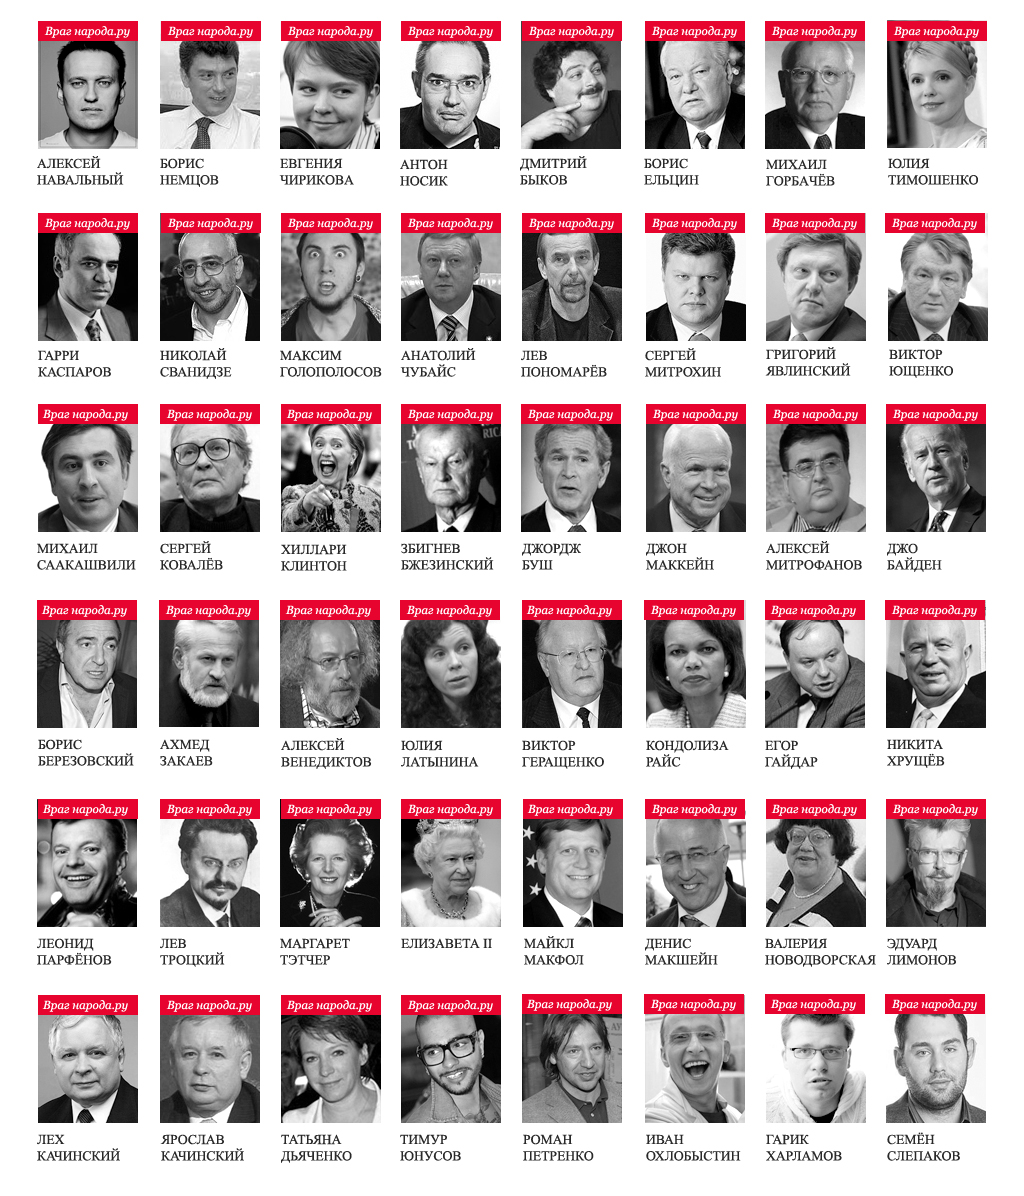 This is a list of "enemies of the people" (mostly Russians critical of the Putin regime), which was published on a Russian website called "Enemies of the People.Ru" and widely distributed by Russian media and social networks in late summer 2014. Boris Nemtsov, Putin's most outspoken opponent and #2 on this list, was murdered next to the Kremlin only six months later. The list included not only domestic "enemies," but also some westerners such as Hillary Clinton, Zbigniew Brzezinski, George W Bush, John McCain, Joe Biden, Condoleezza Rice, Margaret Thatcher, Queen Elizabeth, Denis MacShane, and Michael McFaul, who was the US Ambassador in Moscow at the time. The neighboring countries were represented by former presidents of Ukraine and Georgia Victor Yushchenko and Mikheil Saakashvili respectively. Surprisingly, some former Soviet and Russian leaders were also there, such as Boris Yeltsin, Mikhail Gorbachev, Nikita Khrushchev and Lev Trotsky. At the same time, Lenin and Stalin, on whose orders tens of millions of Soviets were killed, were missing.